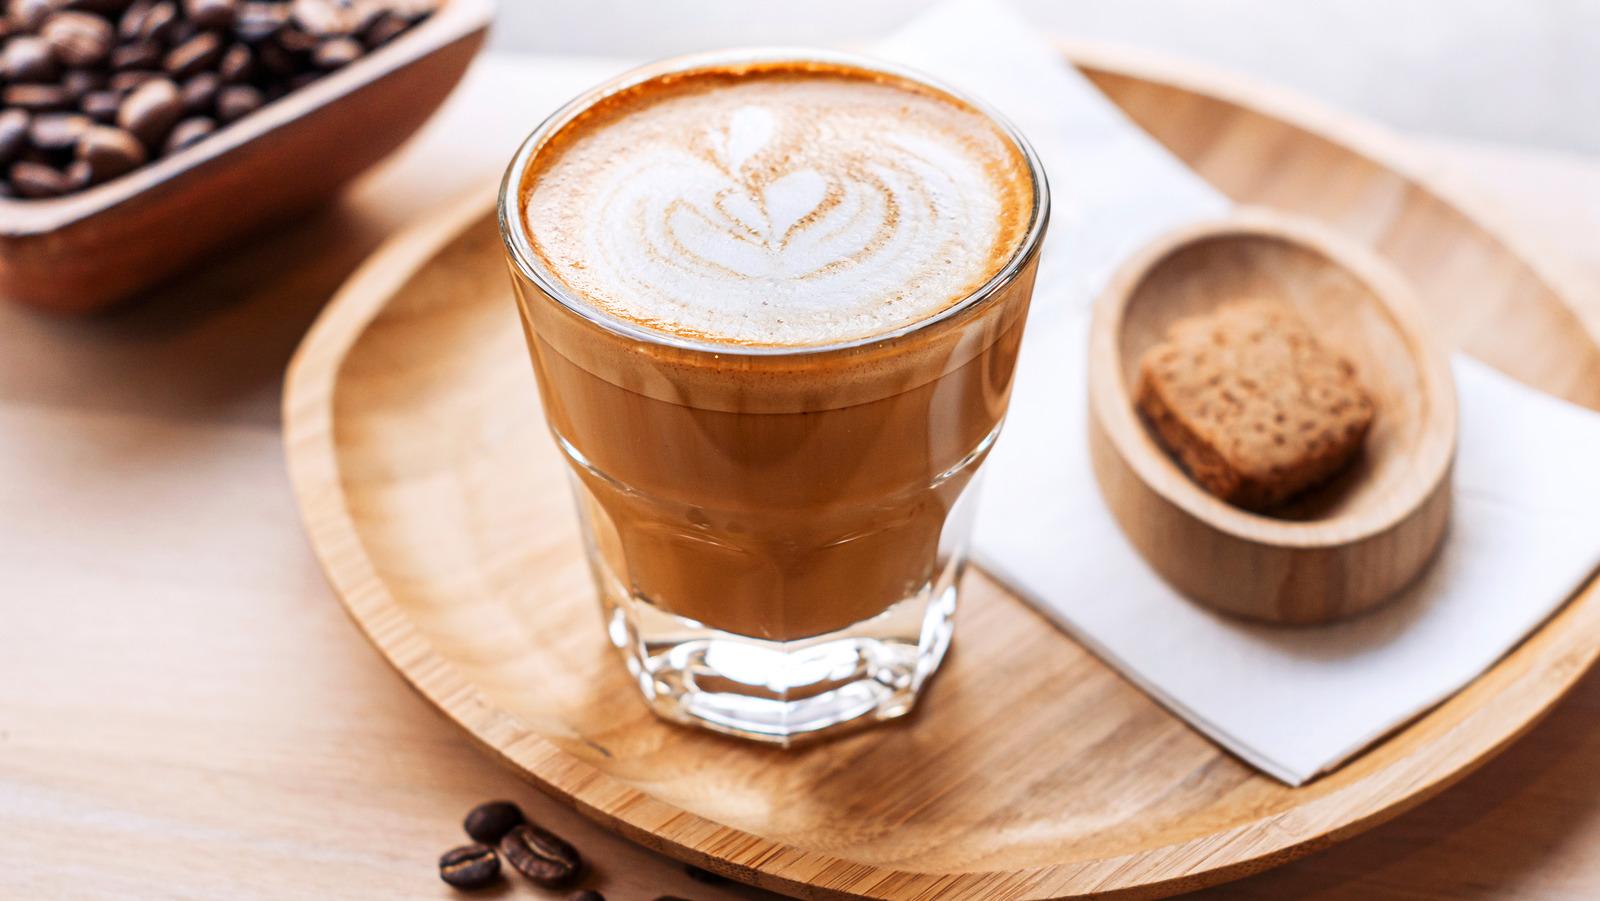 https://www.tastingtable.com/img/gallery/cortado-the-espresso-drink-you-should-try-on-your-next-coffee-run/l-intro-1662058799.jpg